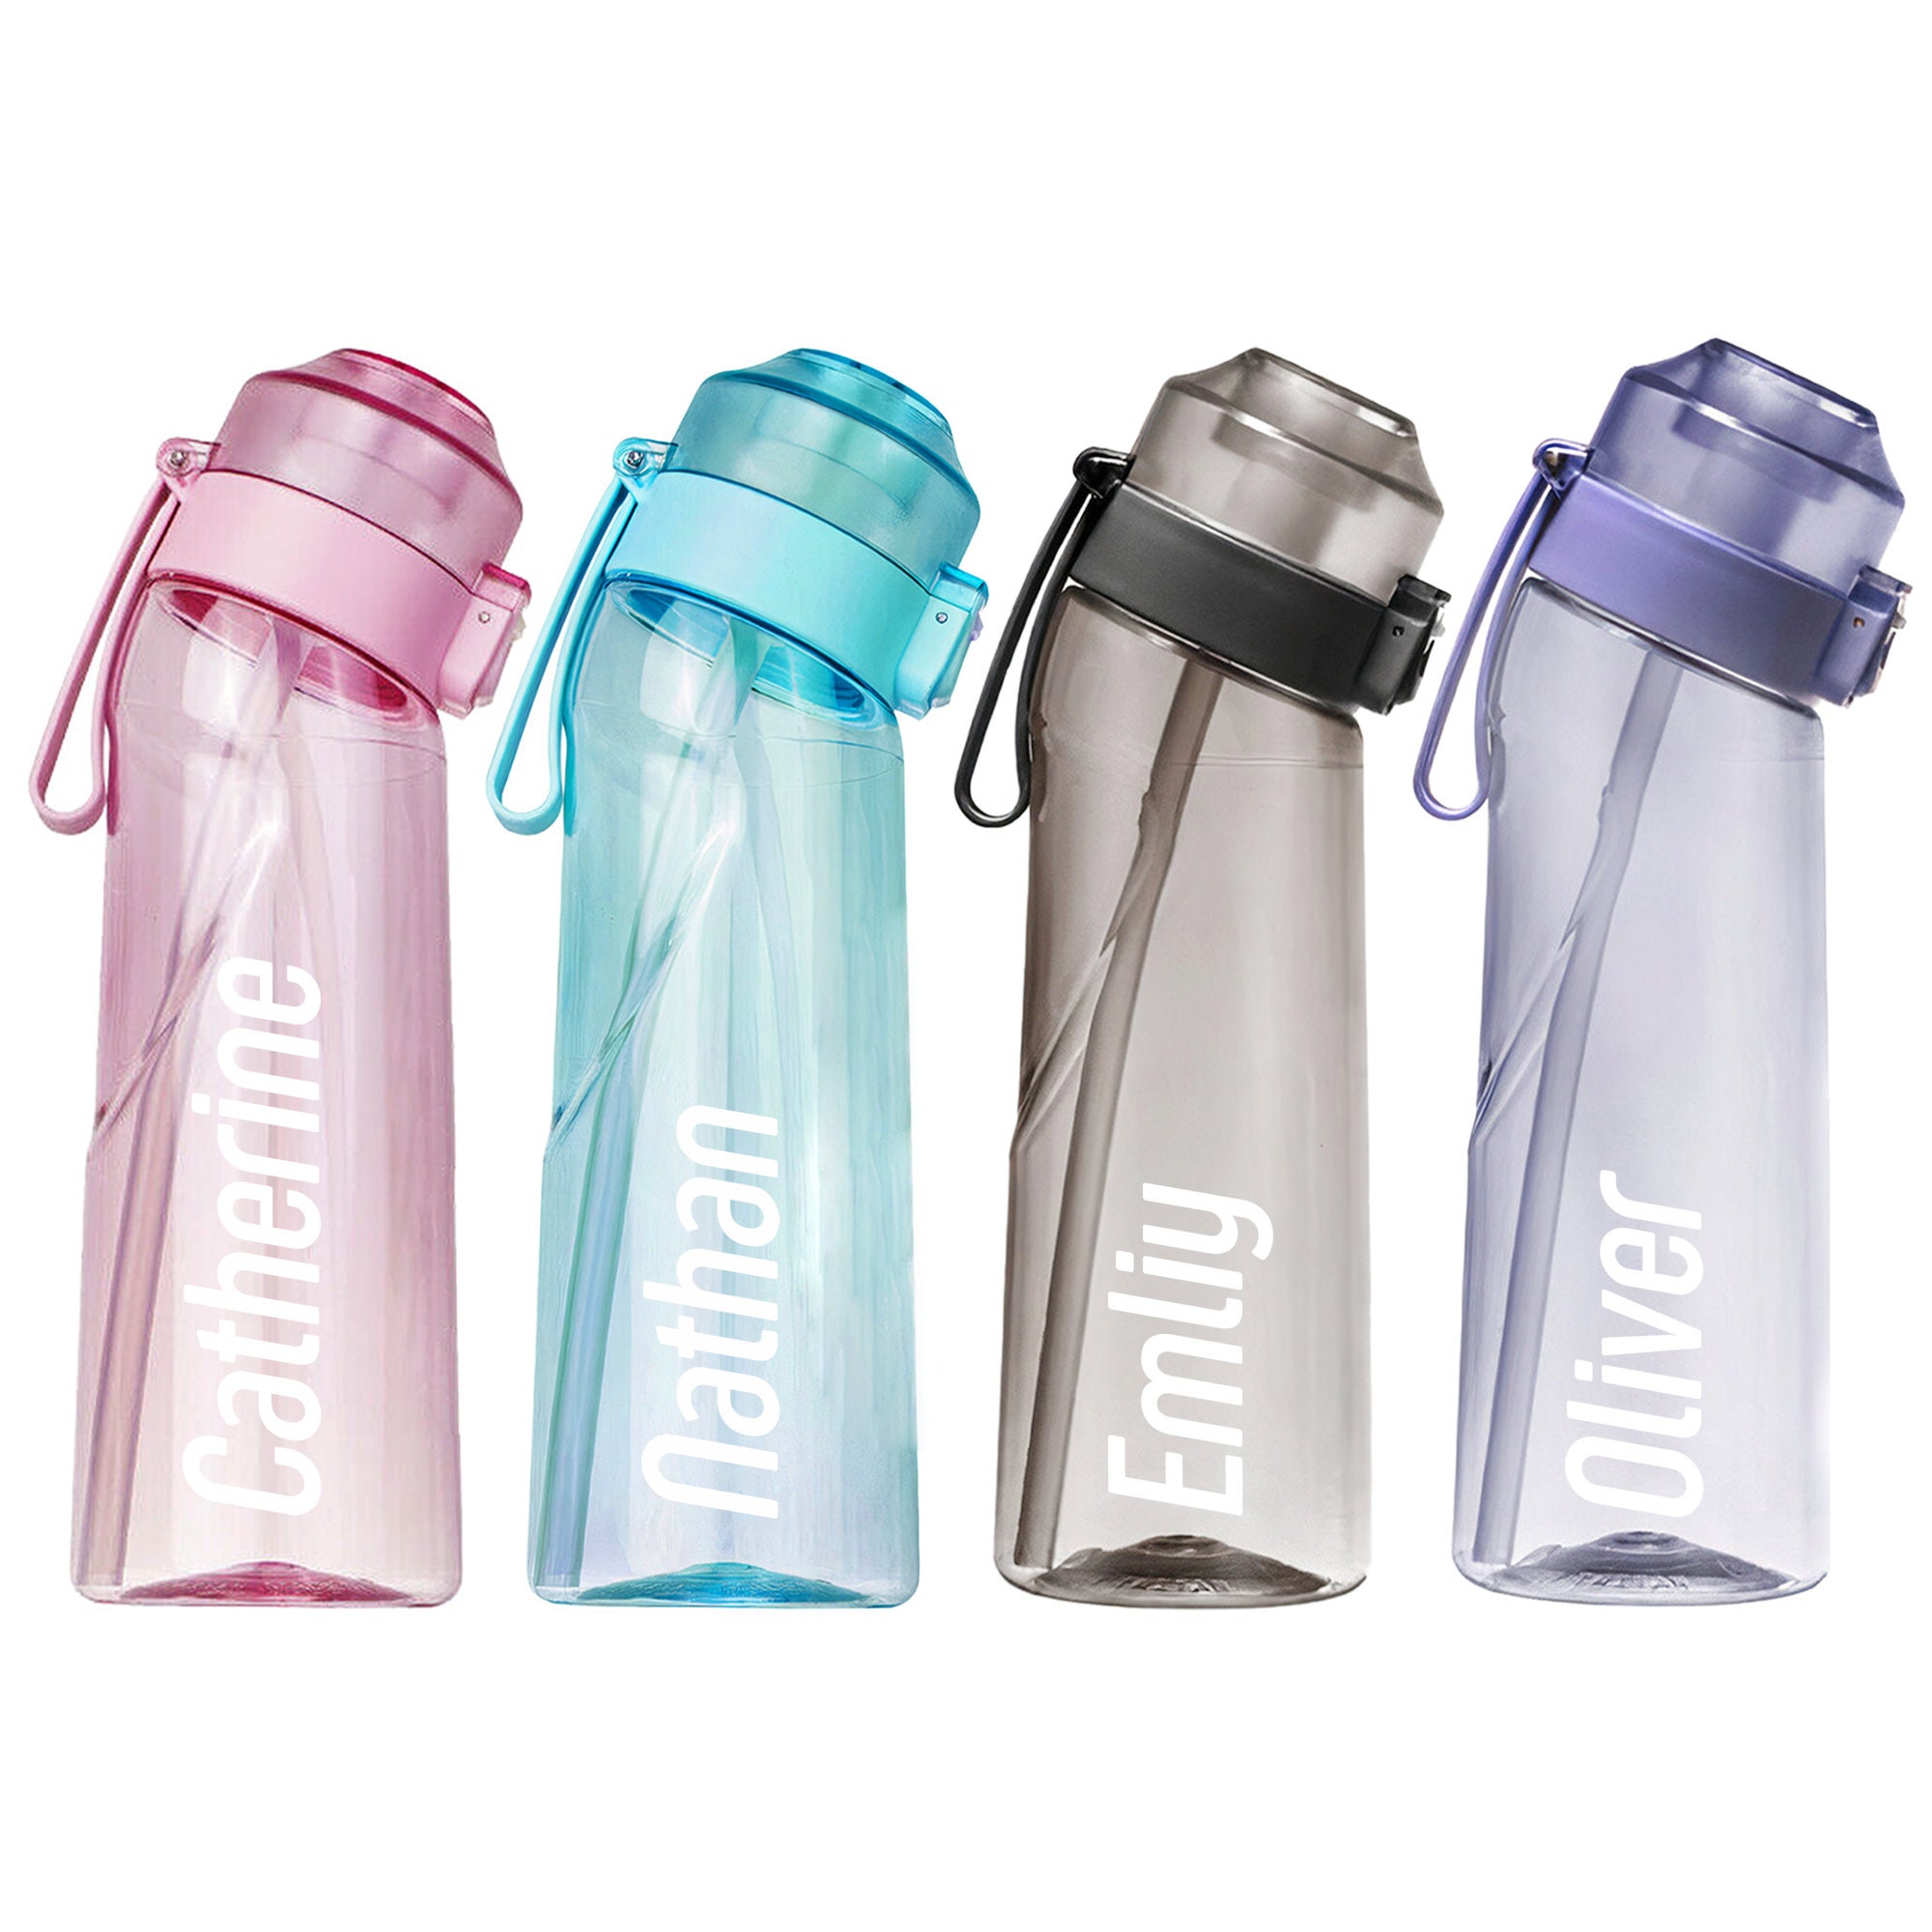 Hot Sale Promotional Gifts Airs up Flavoured Water Bottle Plastic